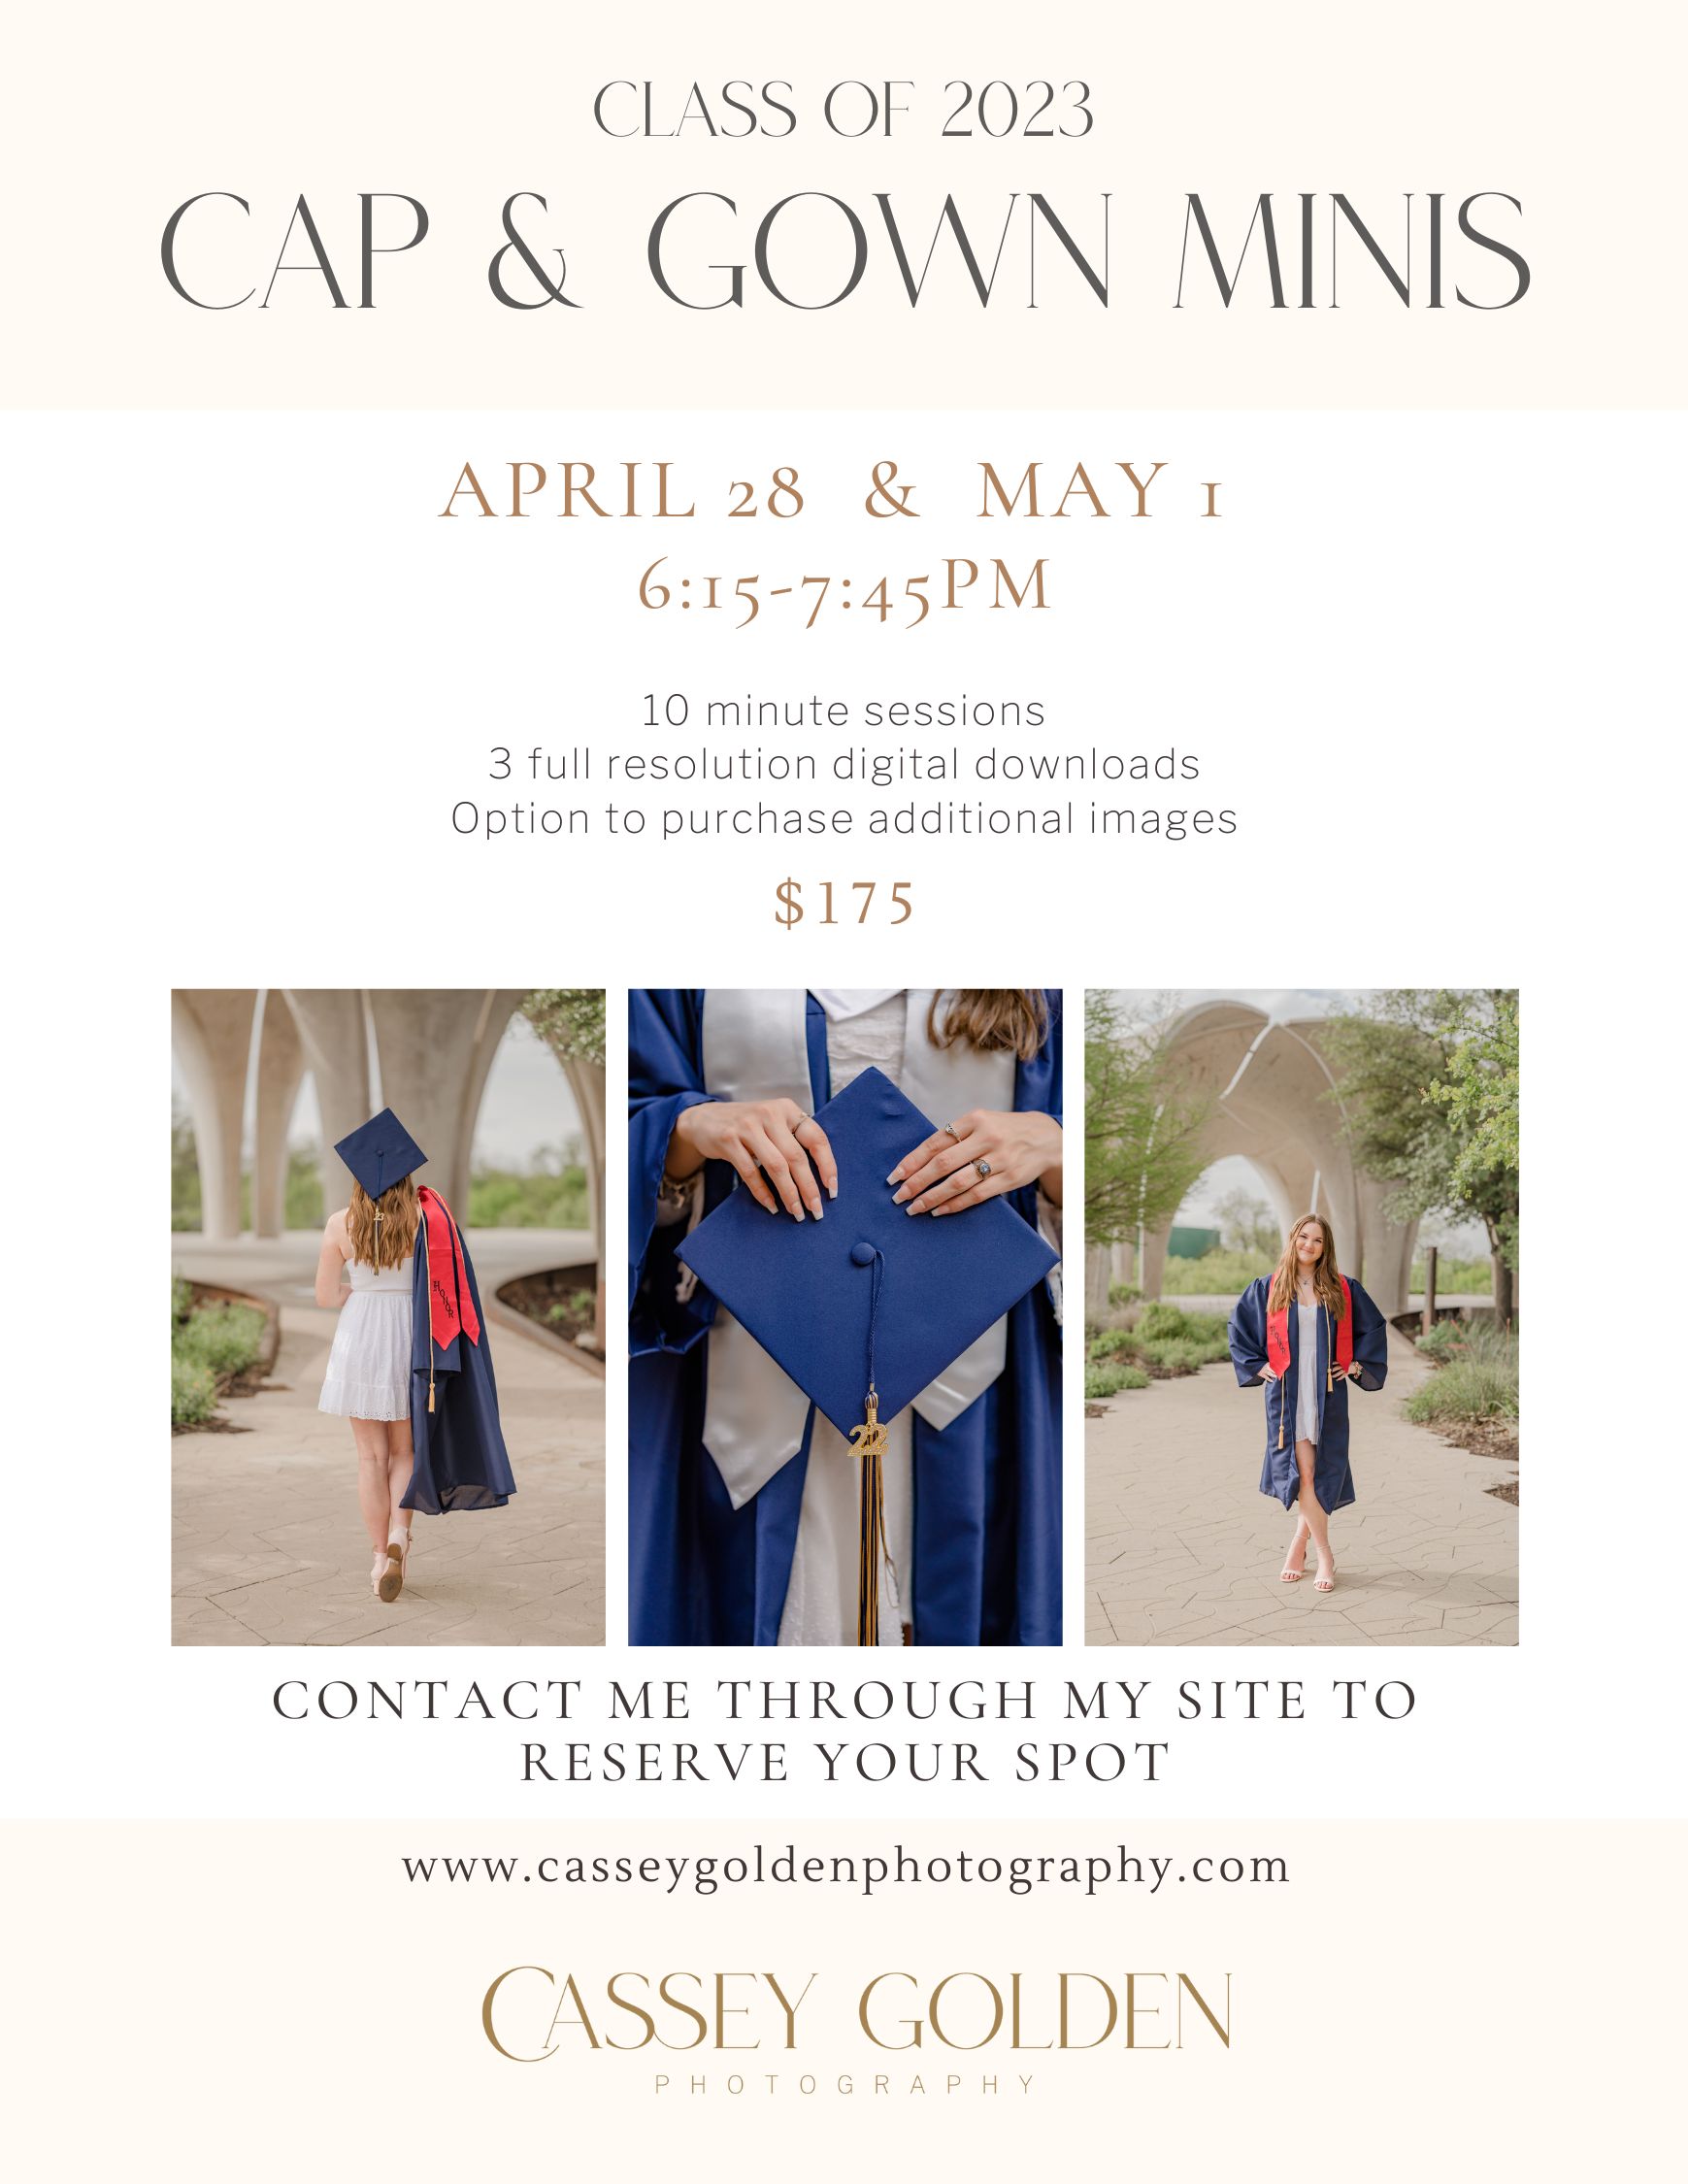 Flyer for 2023 San Antonio Cap and Gown Mini Sessions by Cassey Golden Photography.